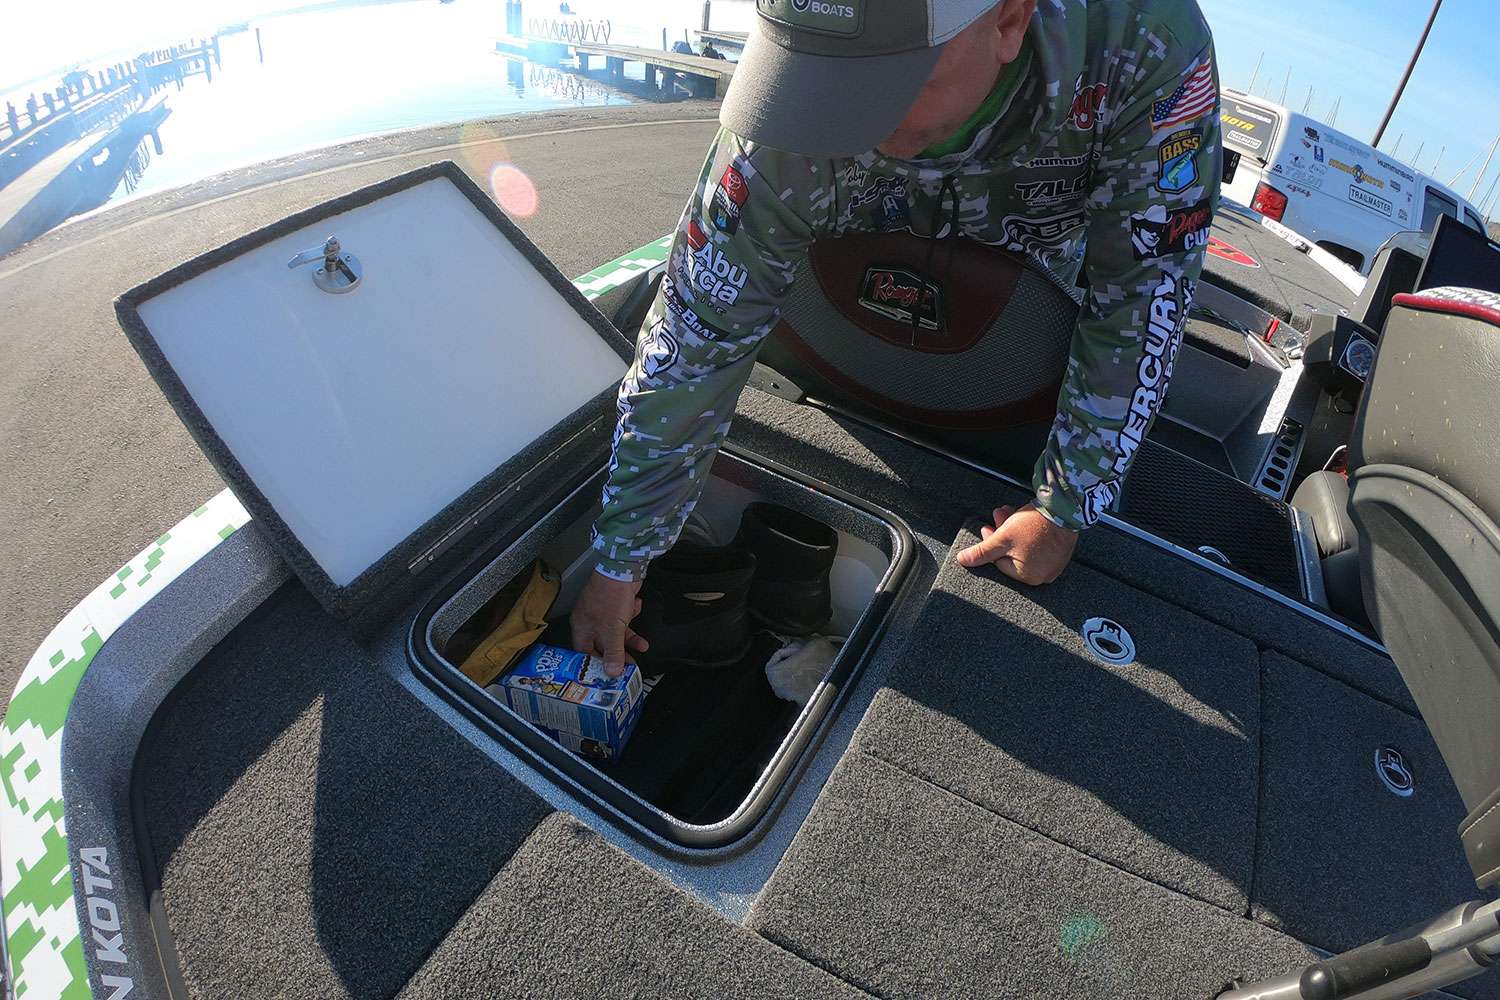 Moving to the rear deck, Kreiger digs into a storage box that holds tackle, tools and something else ... what is that?